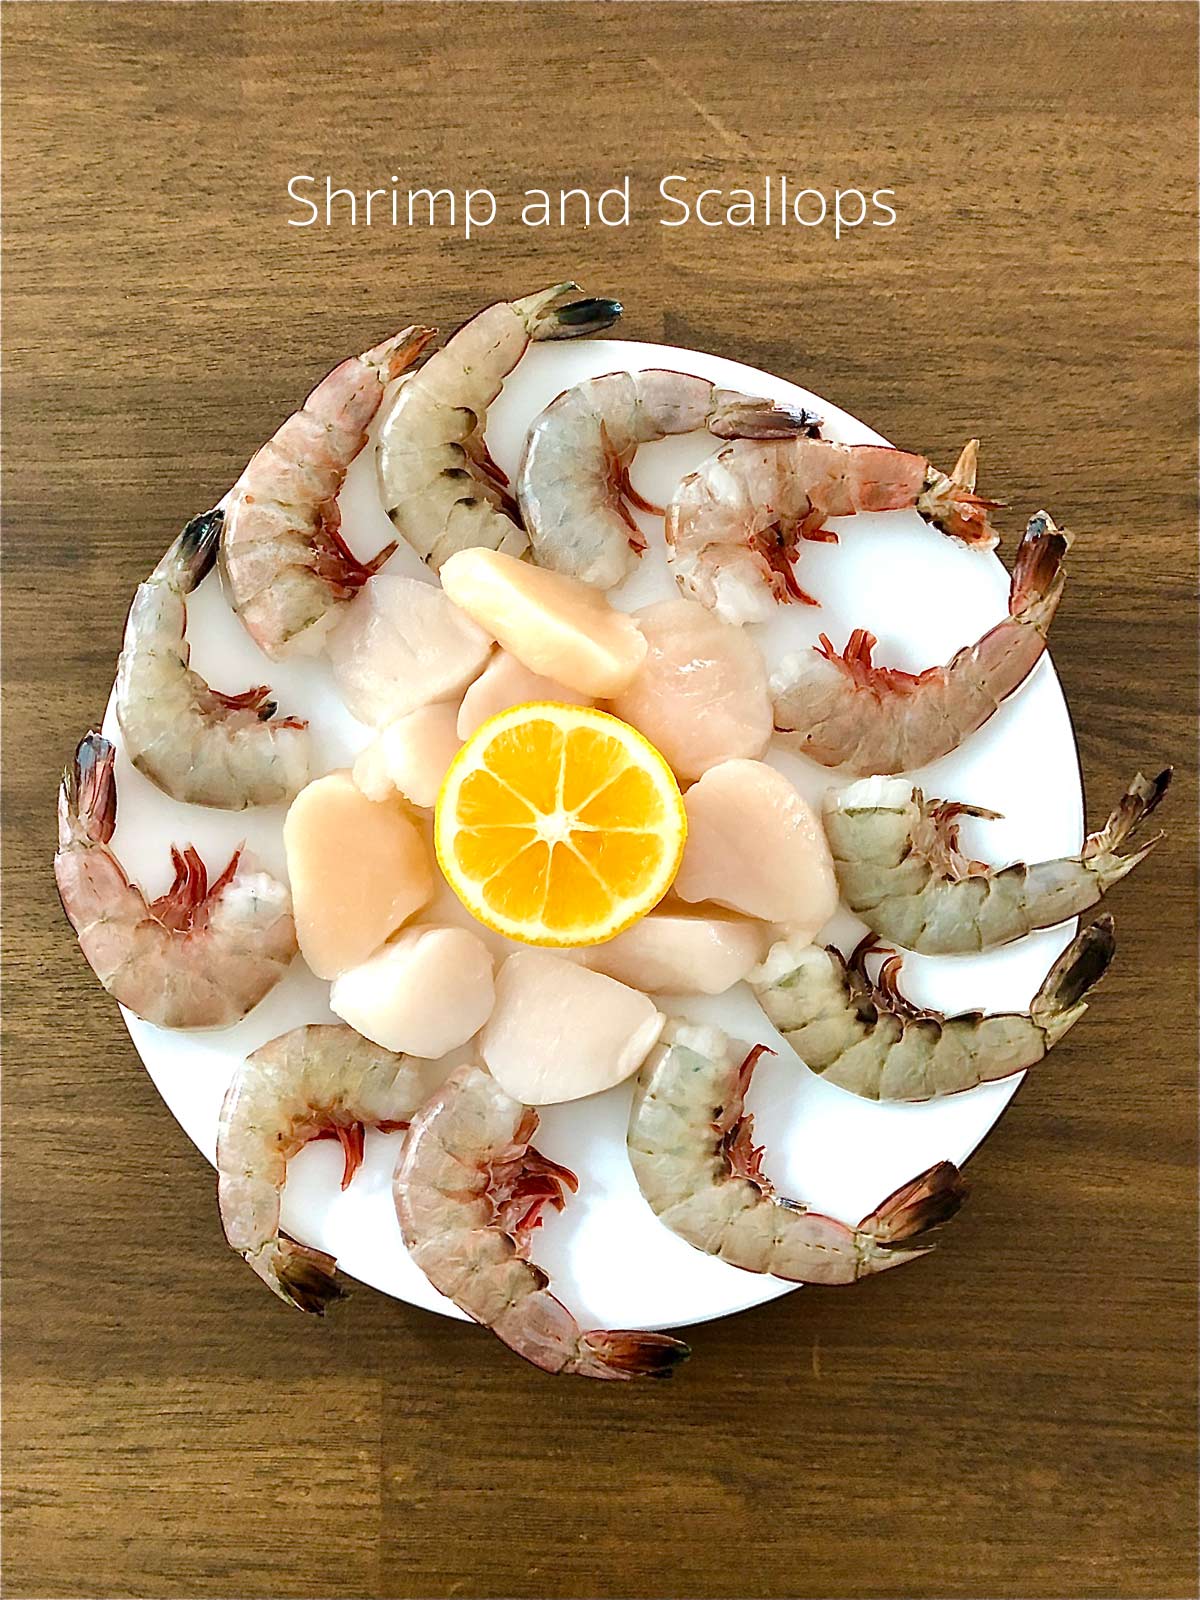 Ingredients for Sautéed Shrimp and Scallops